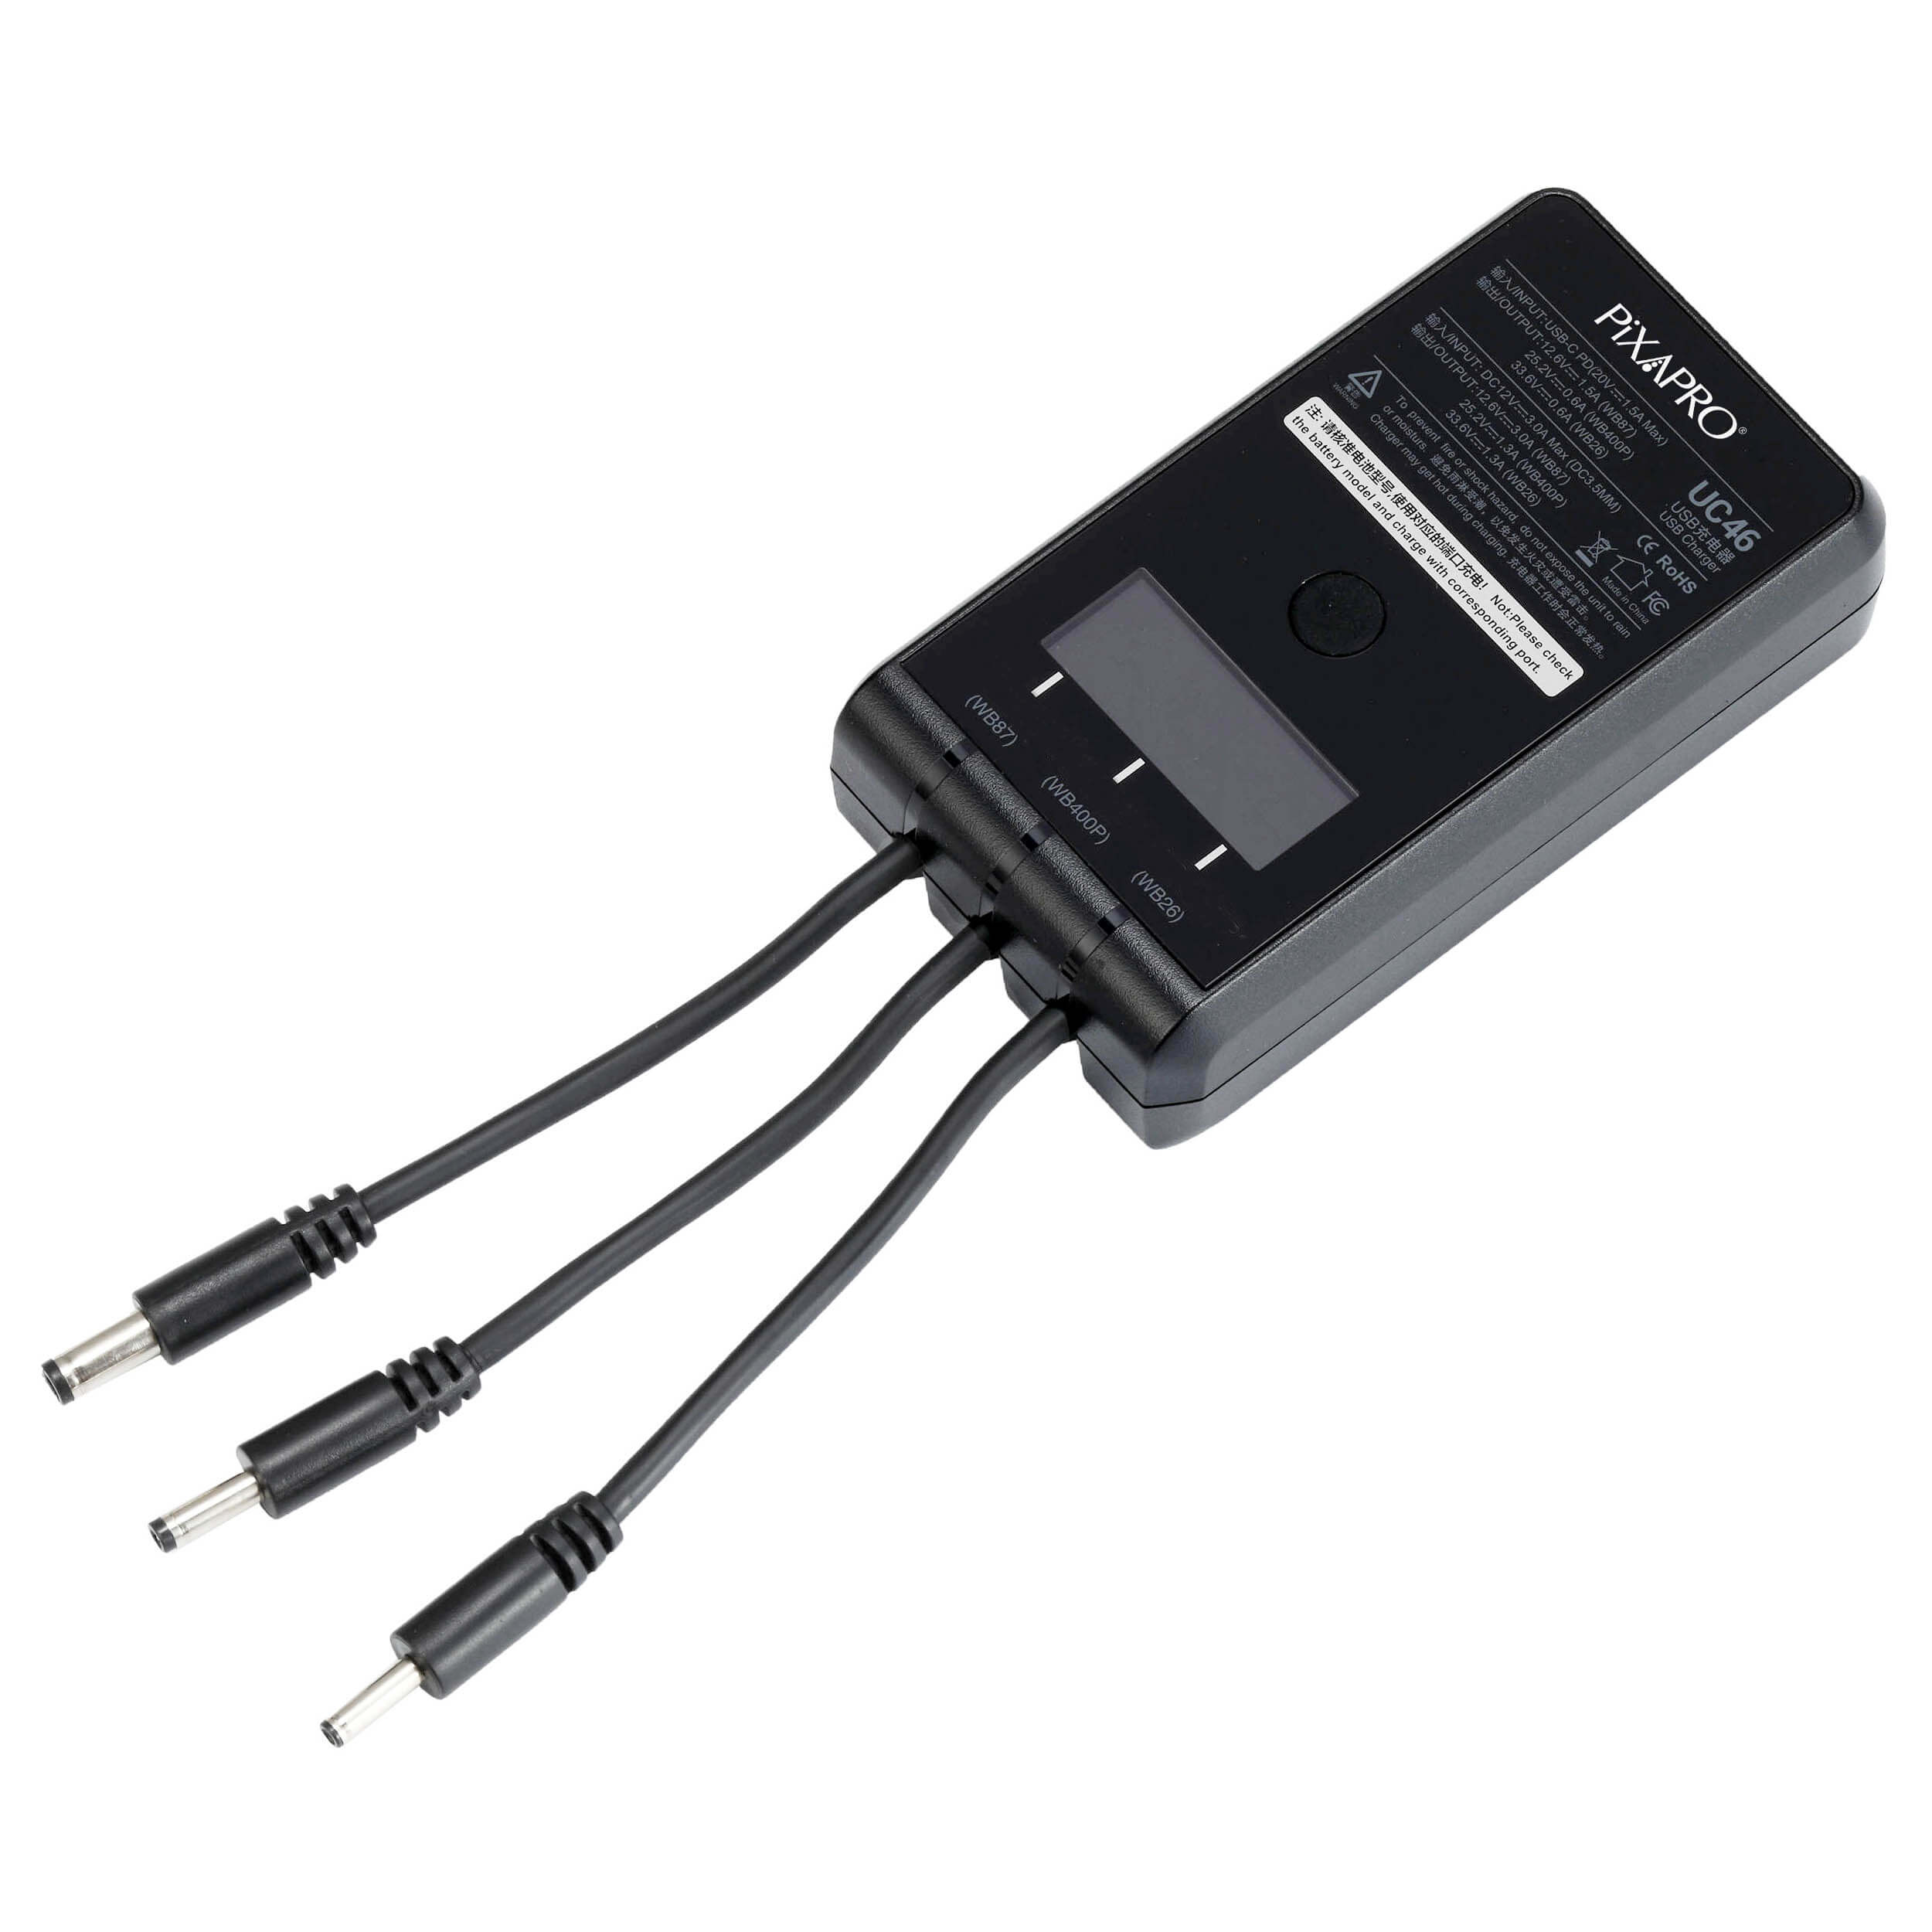 UC64 Charger body compatible with CITI600 Manual/TTL/PRO & CITI400 PRO